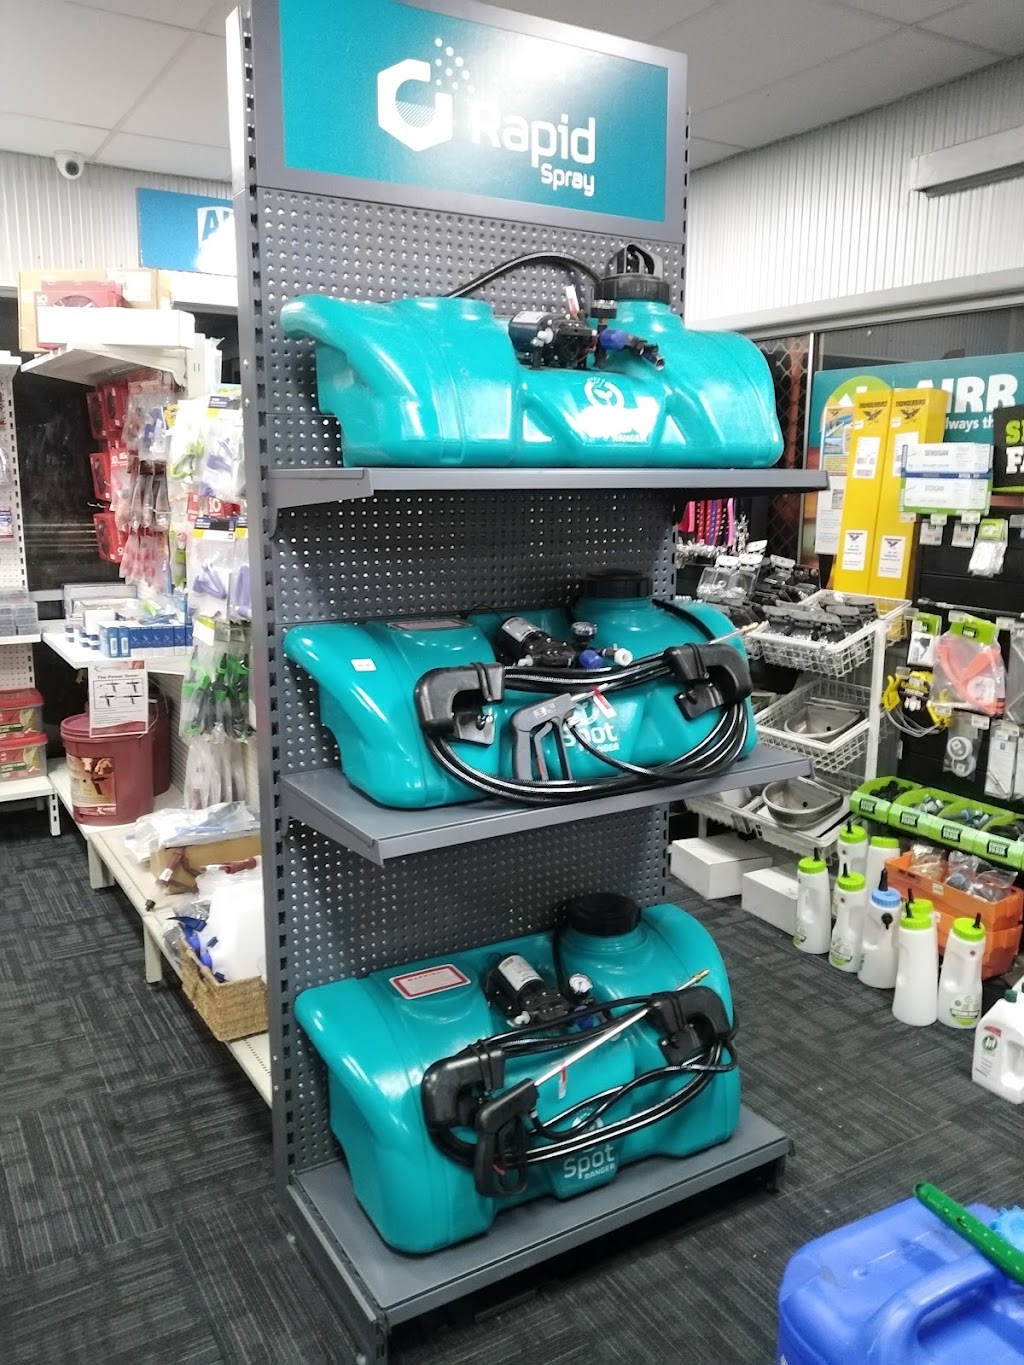 South East Rural Supplies |  | 6 Commissioner St, Cooma NSW 2630, Australia | 0264523511 OR +61 2 6452 3511